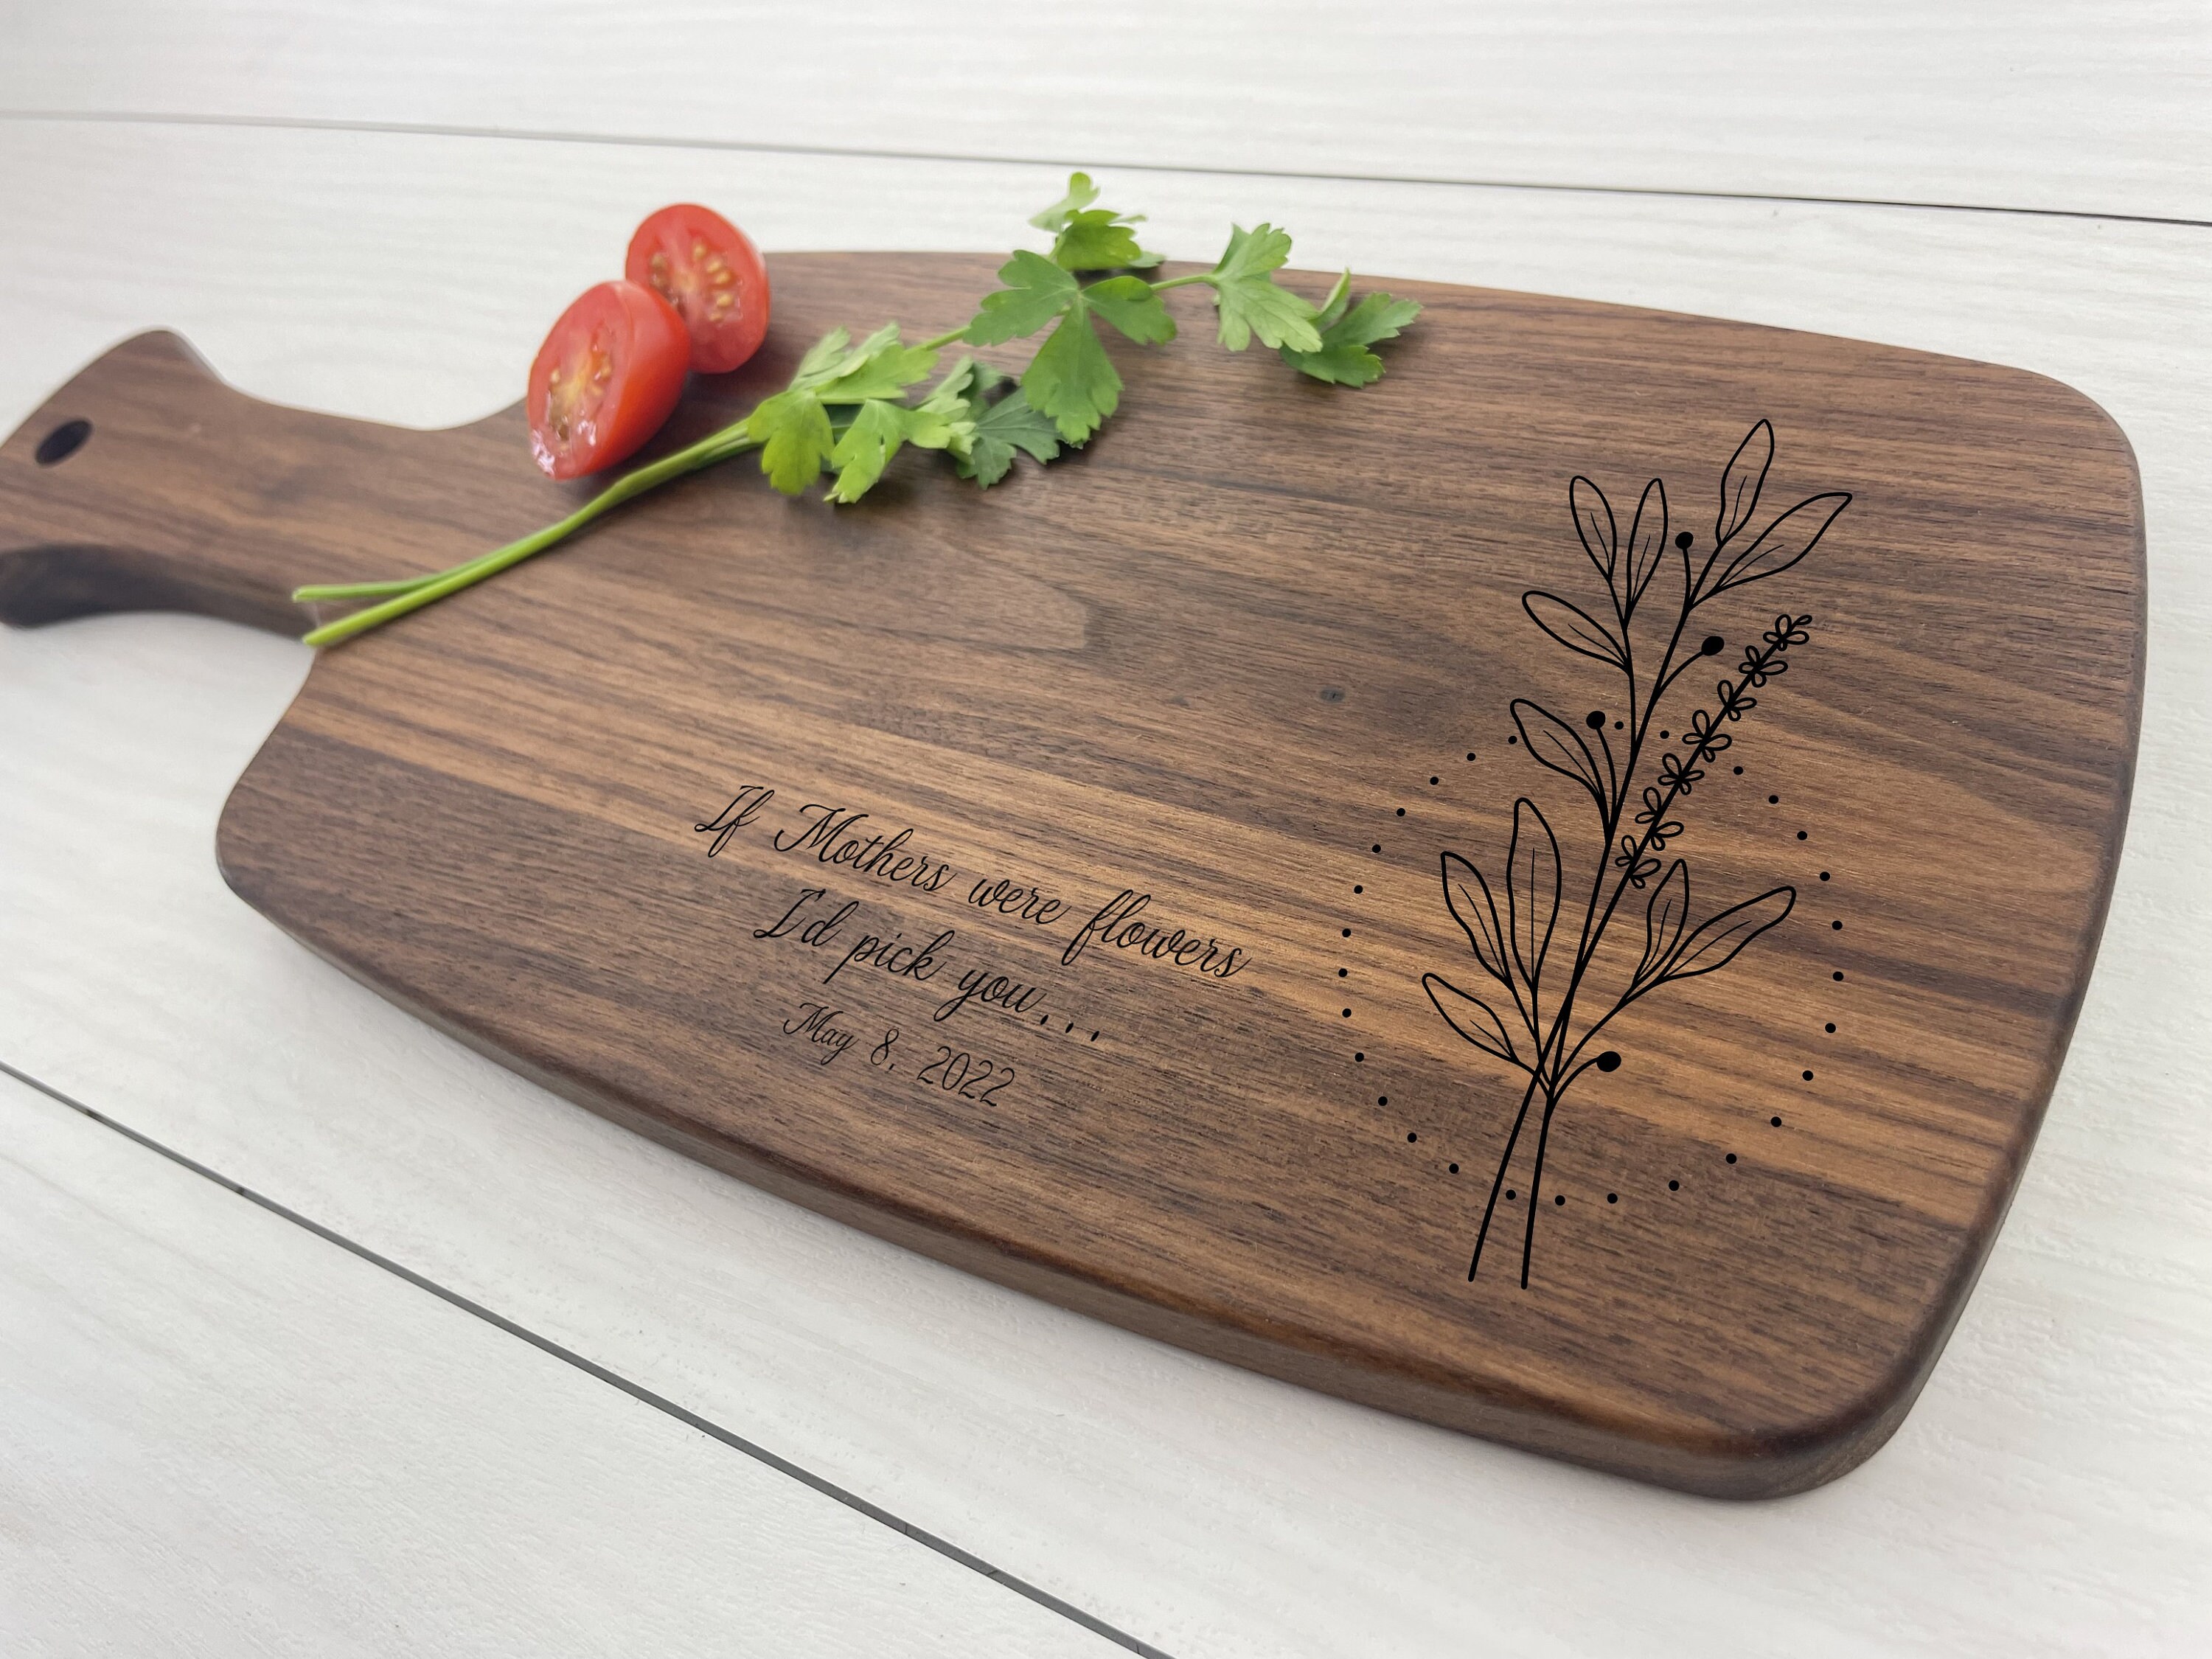 Small Cutting Board with Grip Handle-Destin, Florida with Beach Chairs –  Frill Seekers Gifts